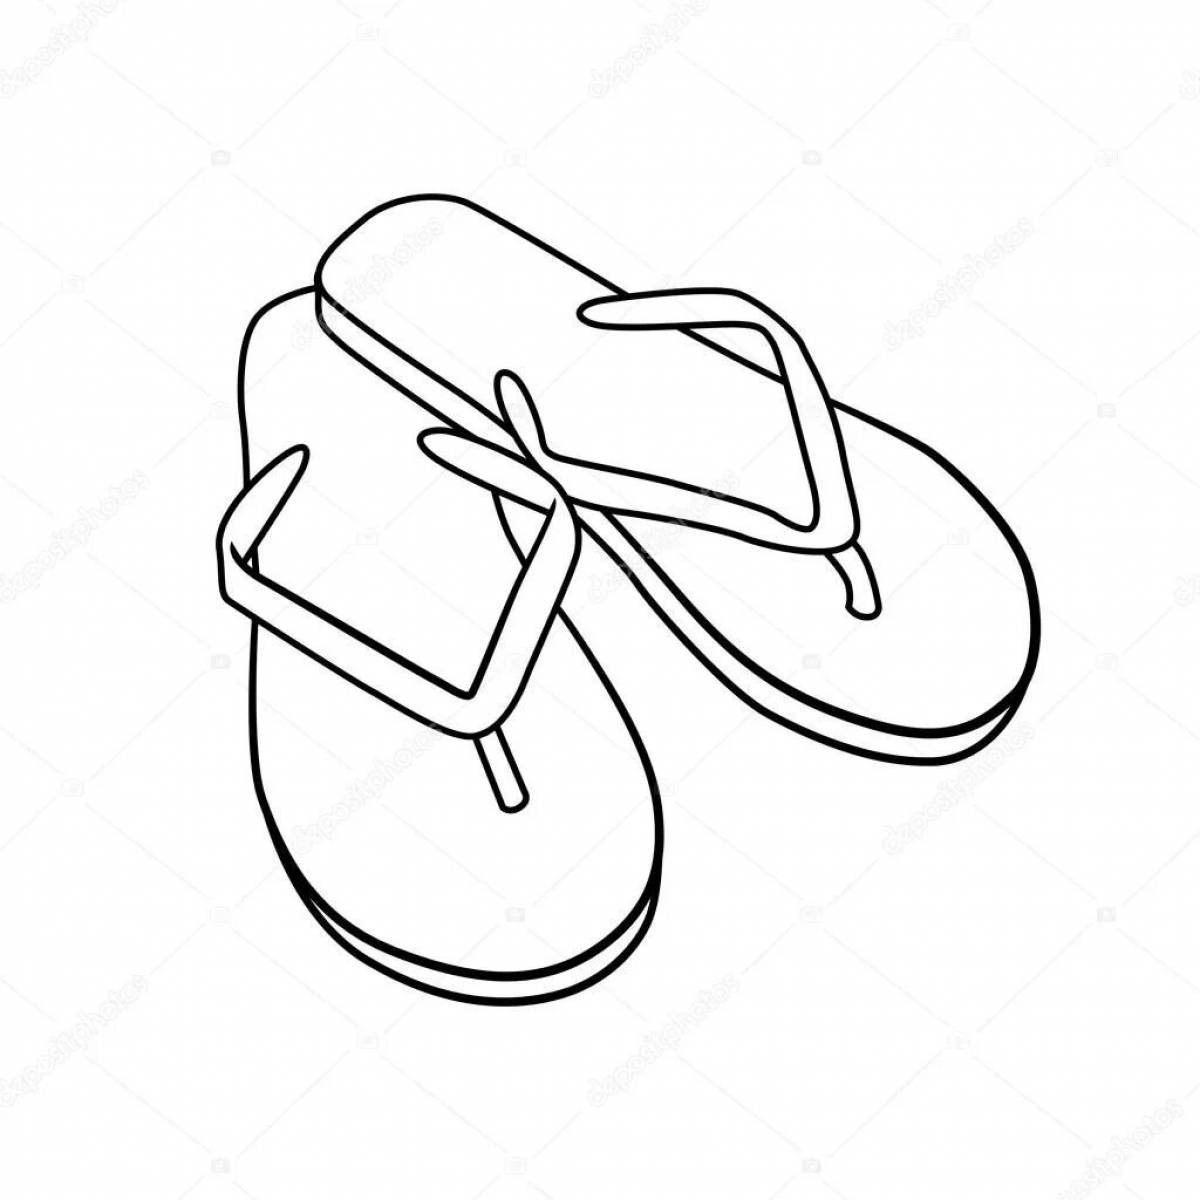 Coloring page gorgeous slippers for babies